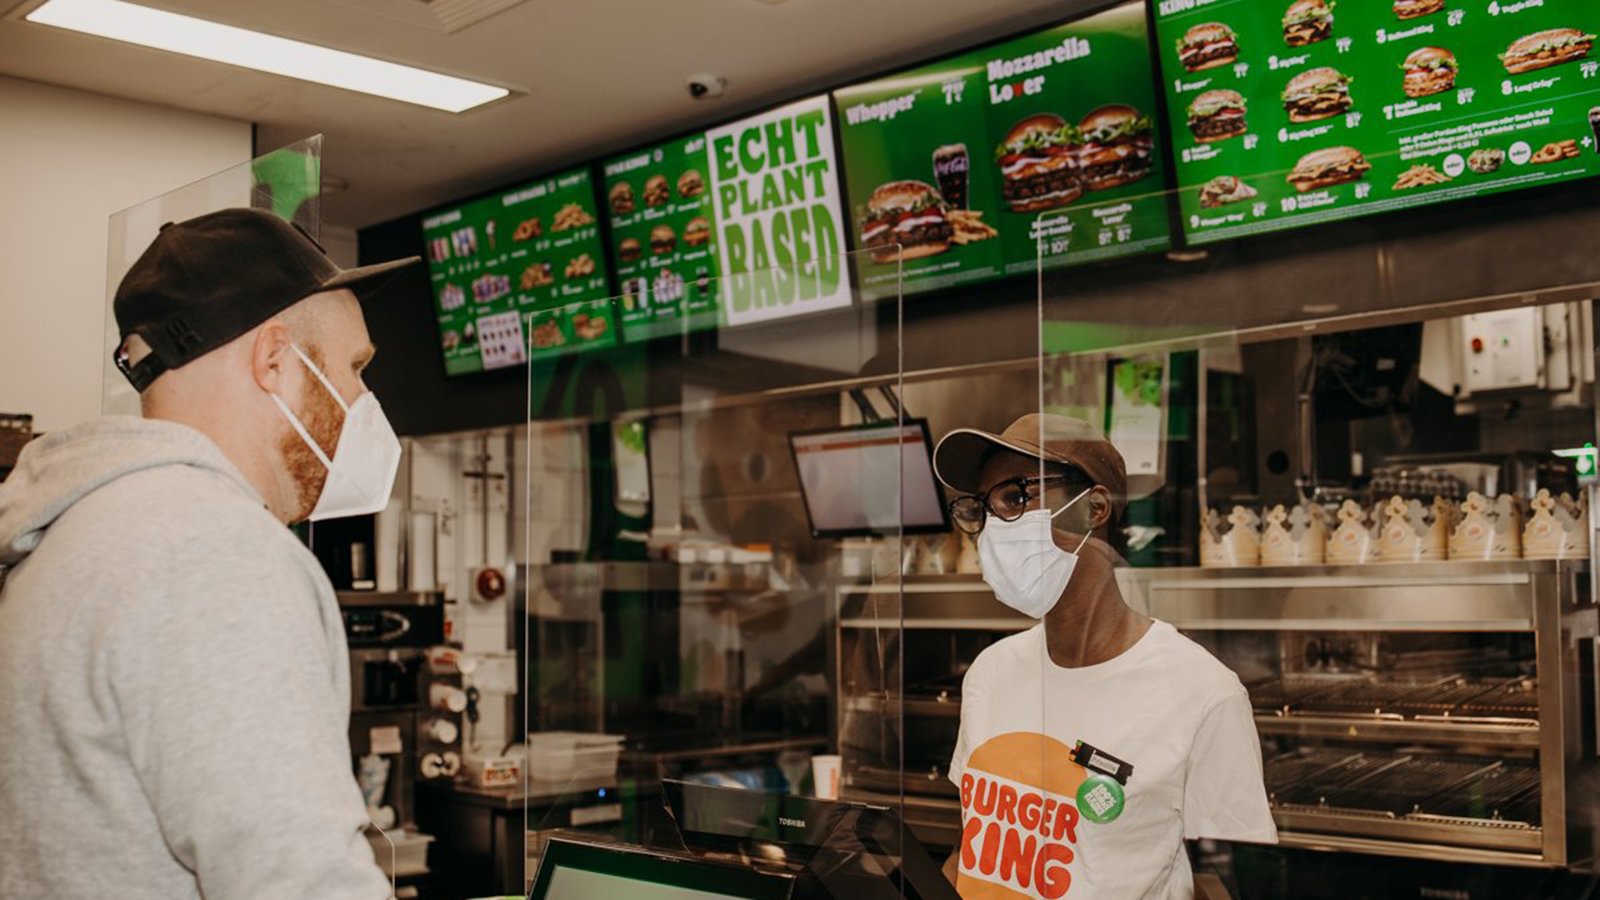 Huge Queues Gather After Burger King Store Hosts 'Plant-Based' Takeover